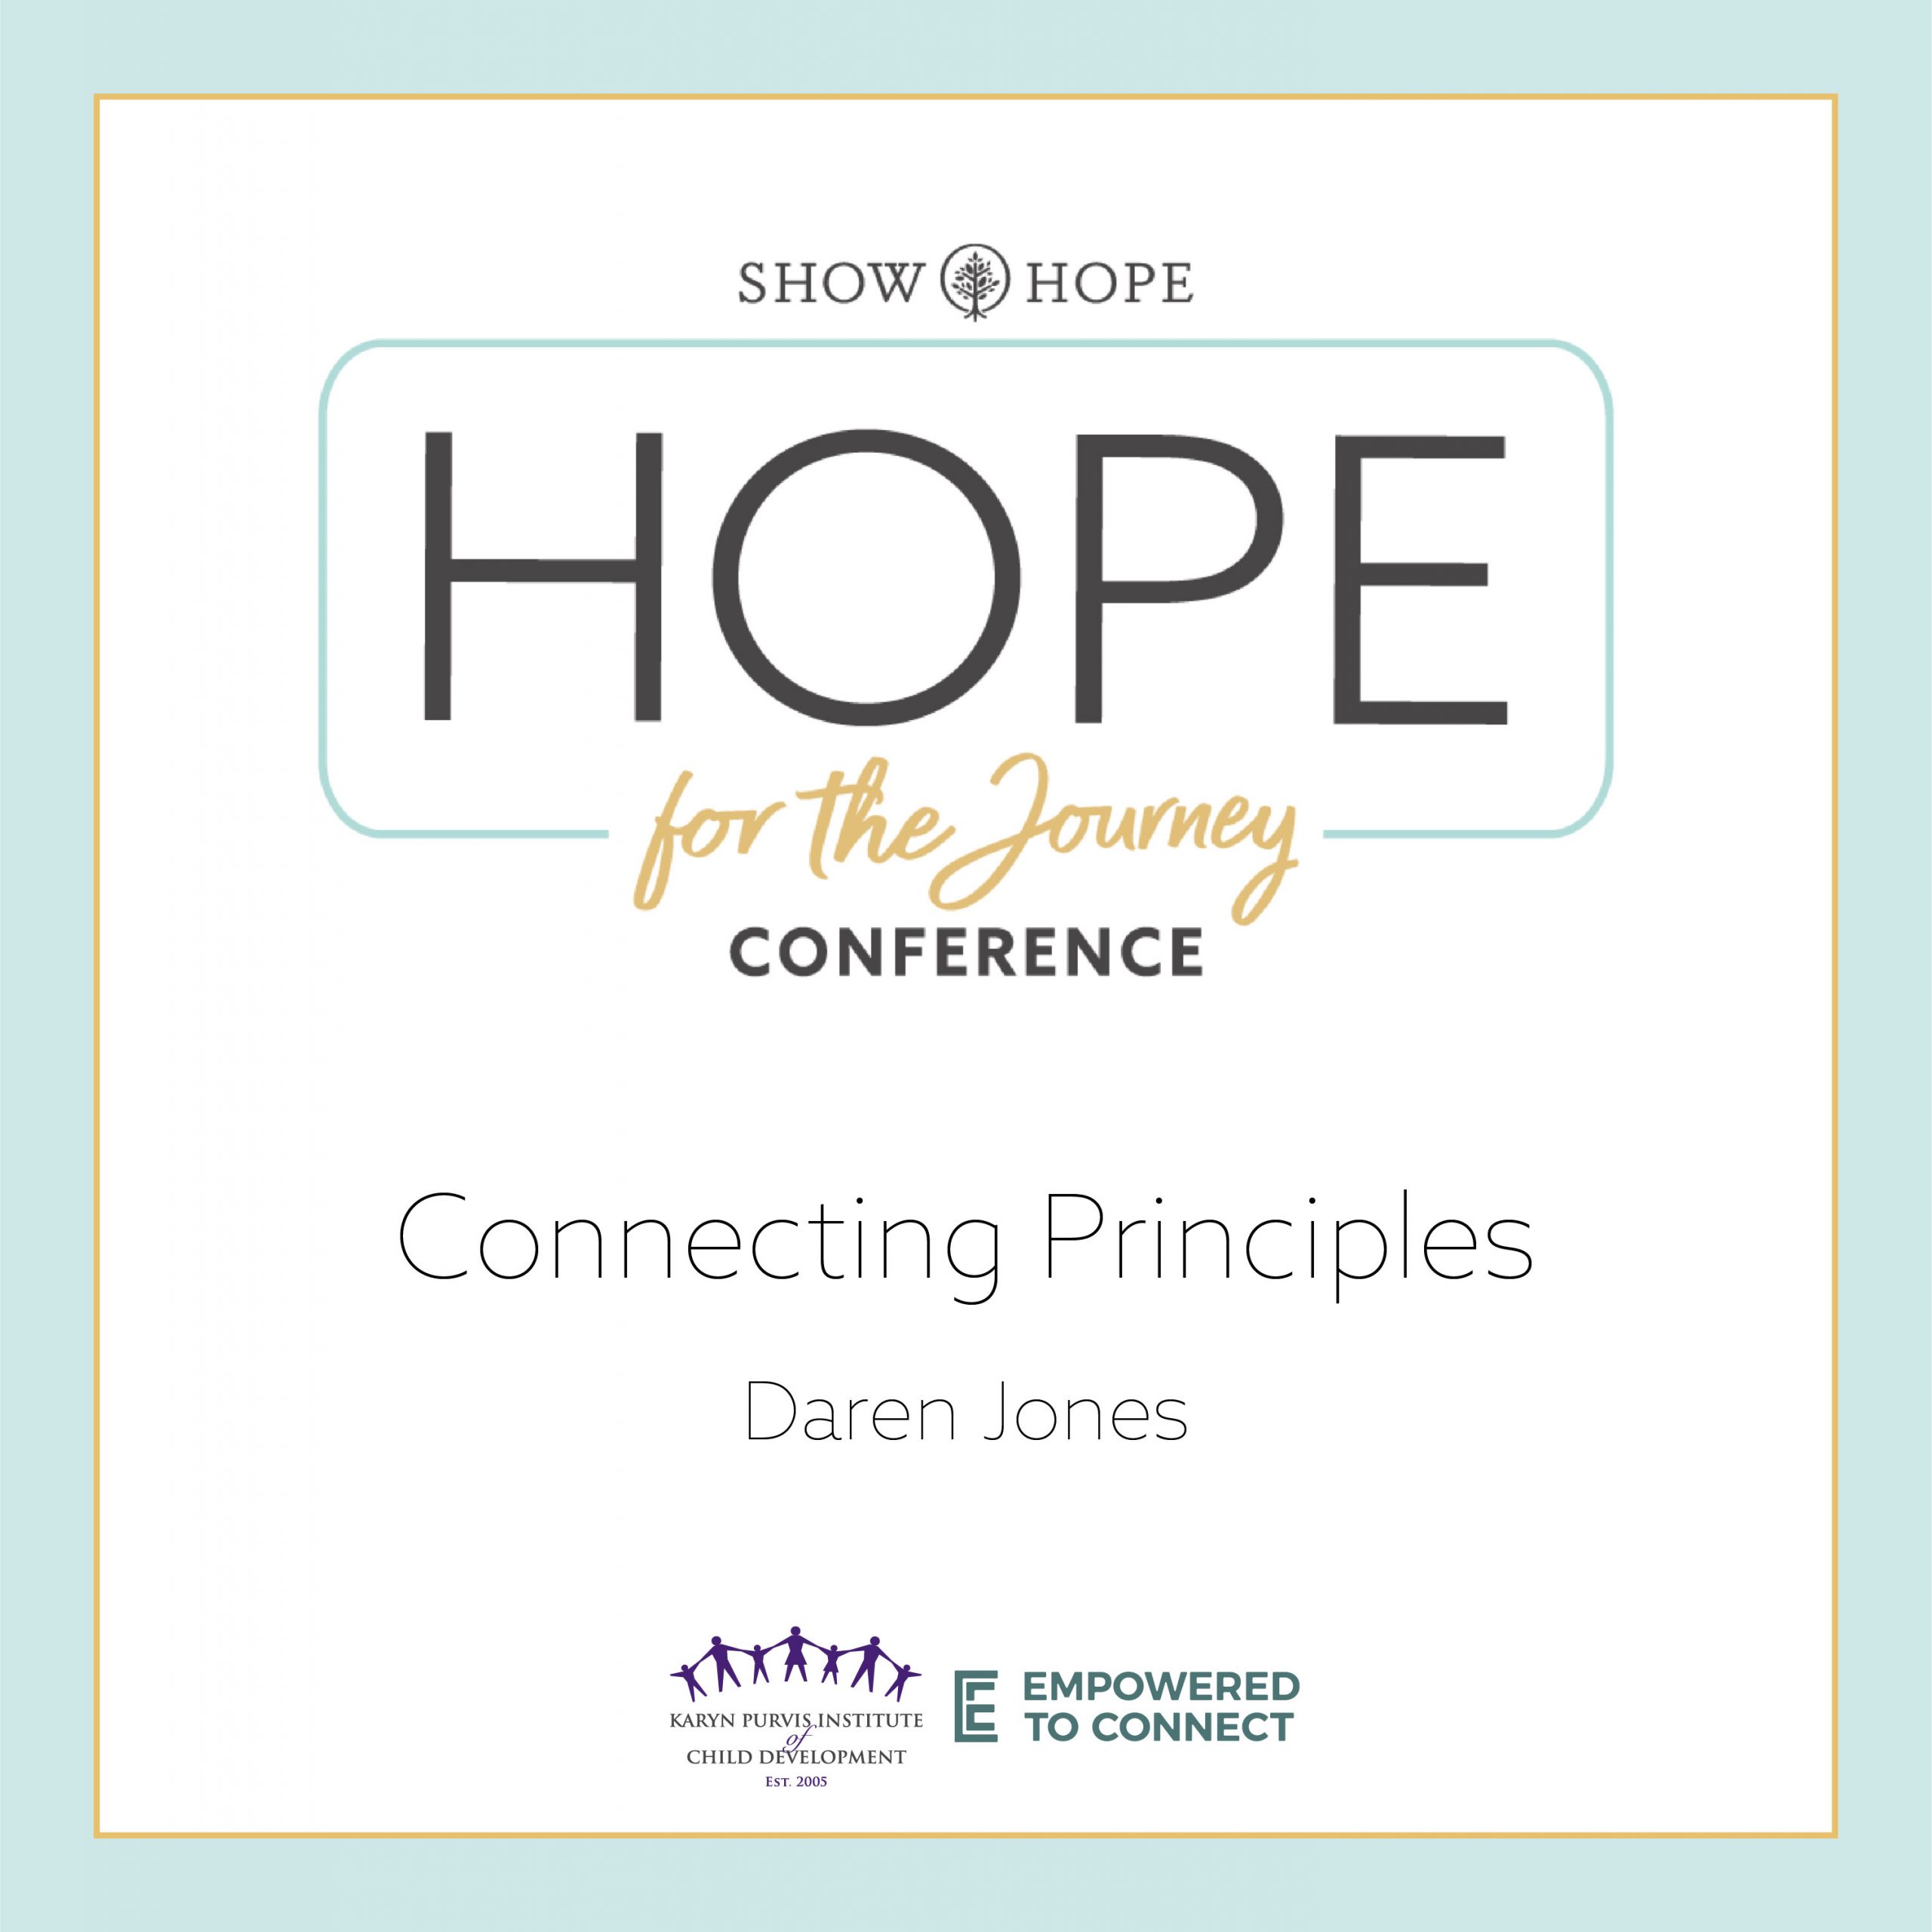 Hope for the Journey Conference 2022 Connecting Principles with Daren Jones